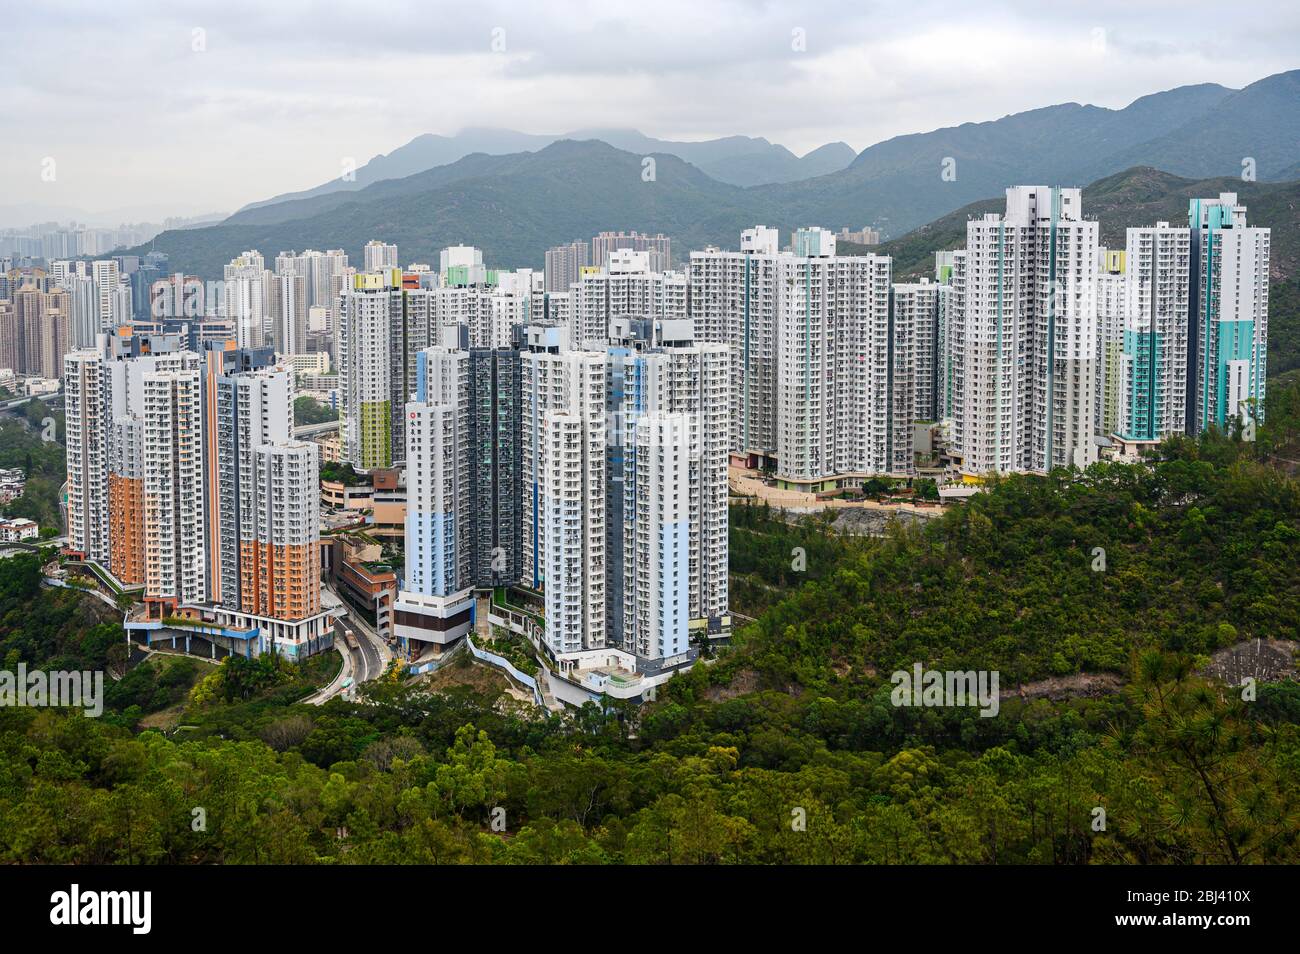 Shui Chuen O Estate, Hong Kong on Mar 7, 2020. It is the largest public housing estate in Shatin and is sitting on a hillside. Stock Photo